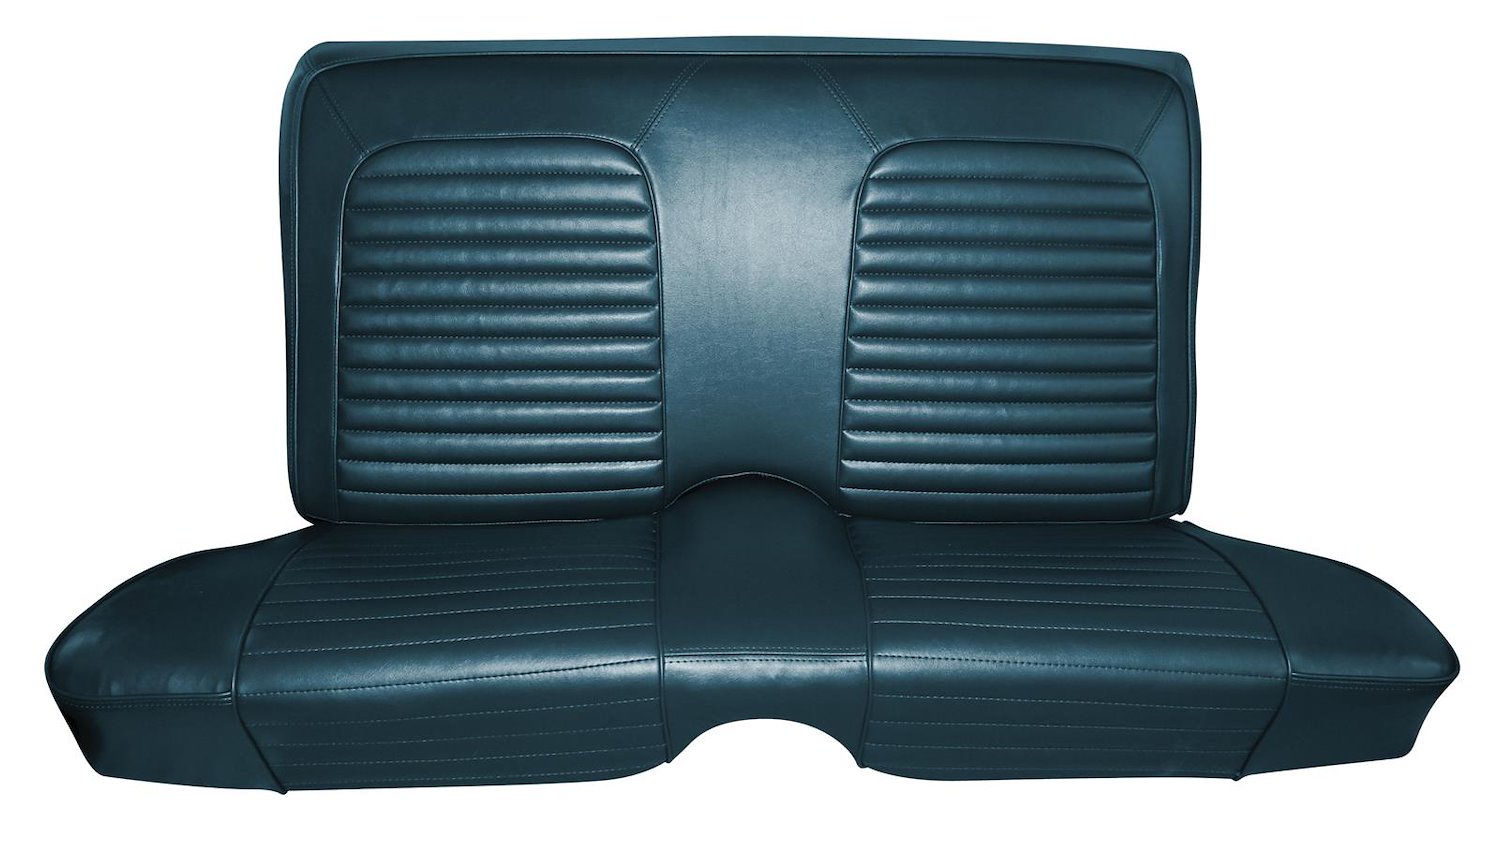 1964 Chevrolet Impala Super Sport 2-Door Coupe Interior Rear Bench Seat Upholstery Set